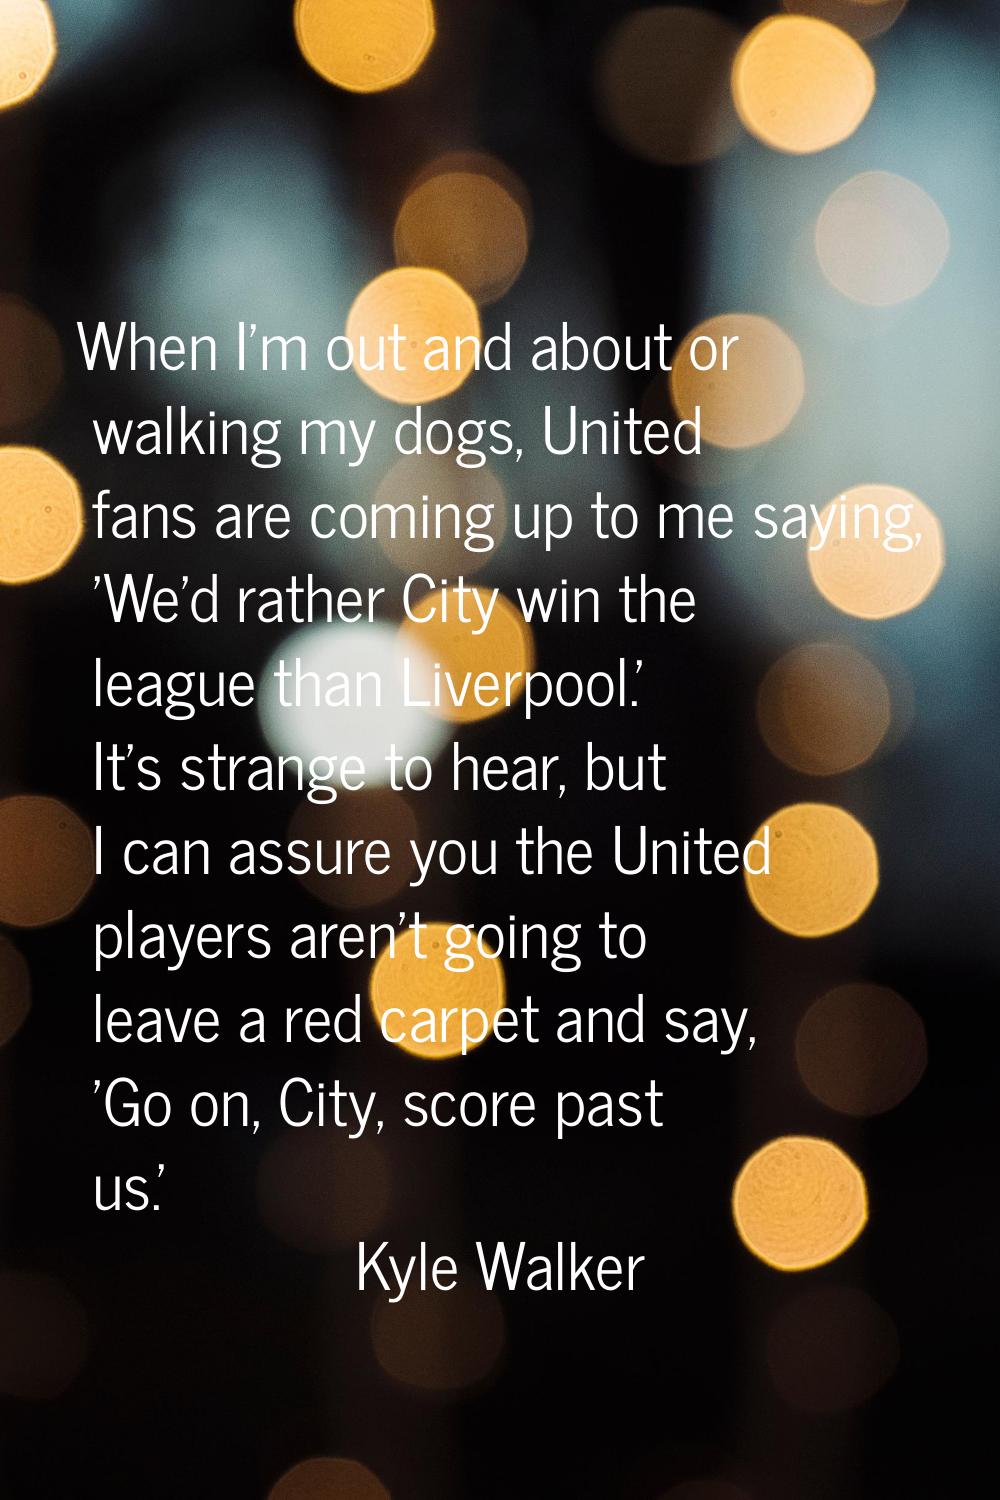 When I'm out and about or walking my dogs, United fans are coming up to me saying, 'We'd rather Cit